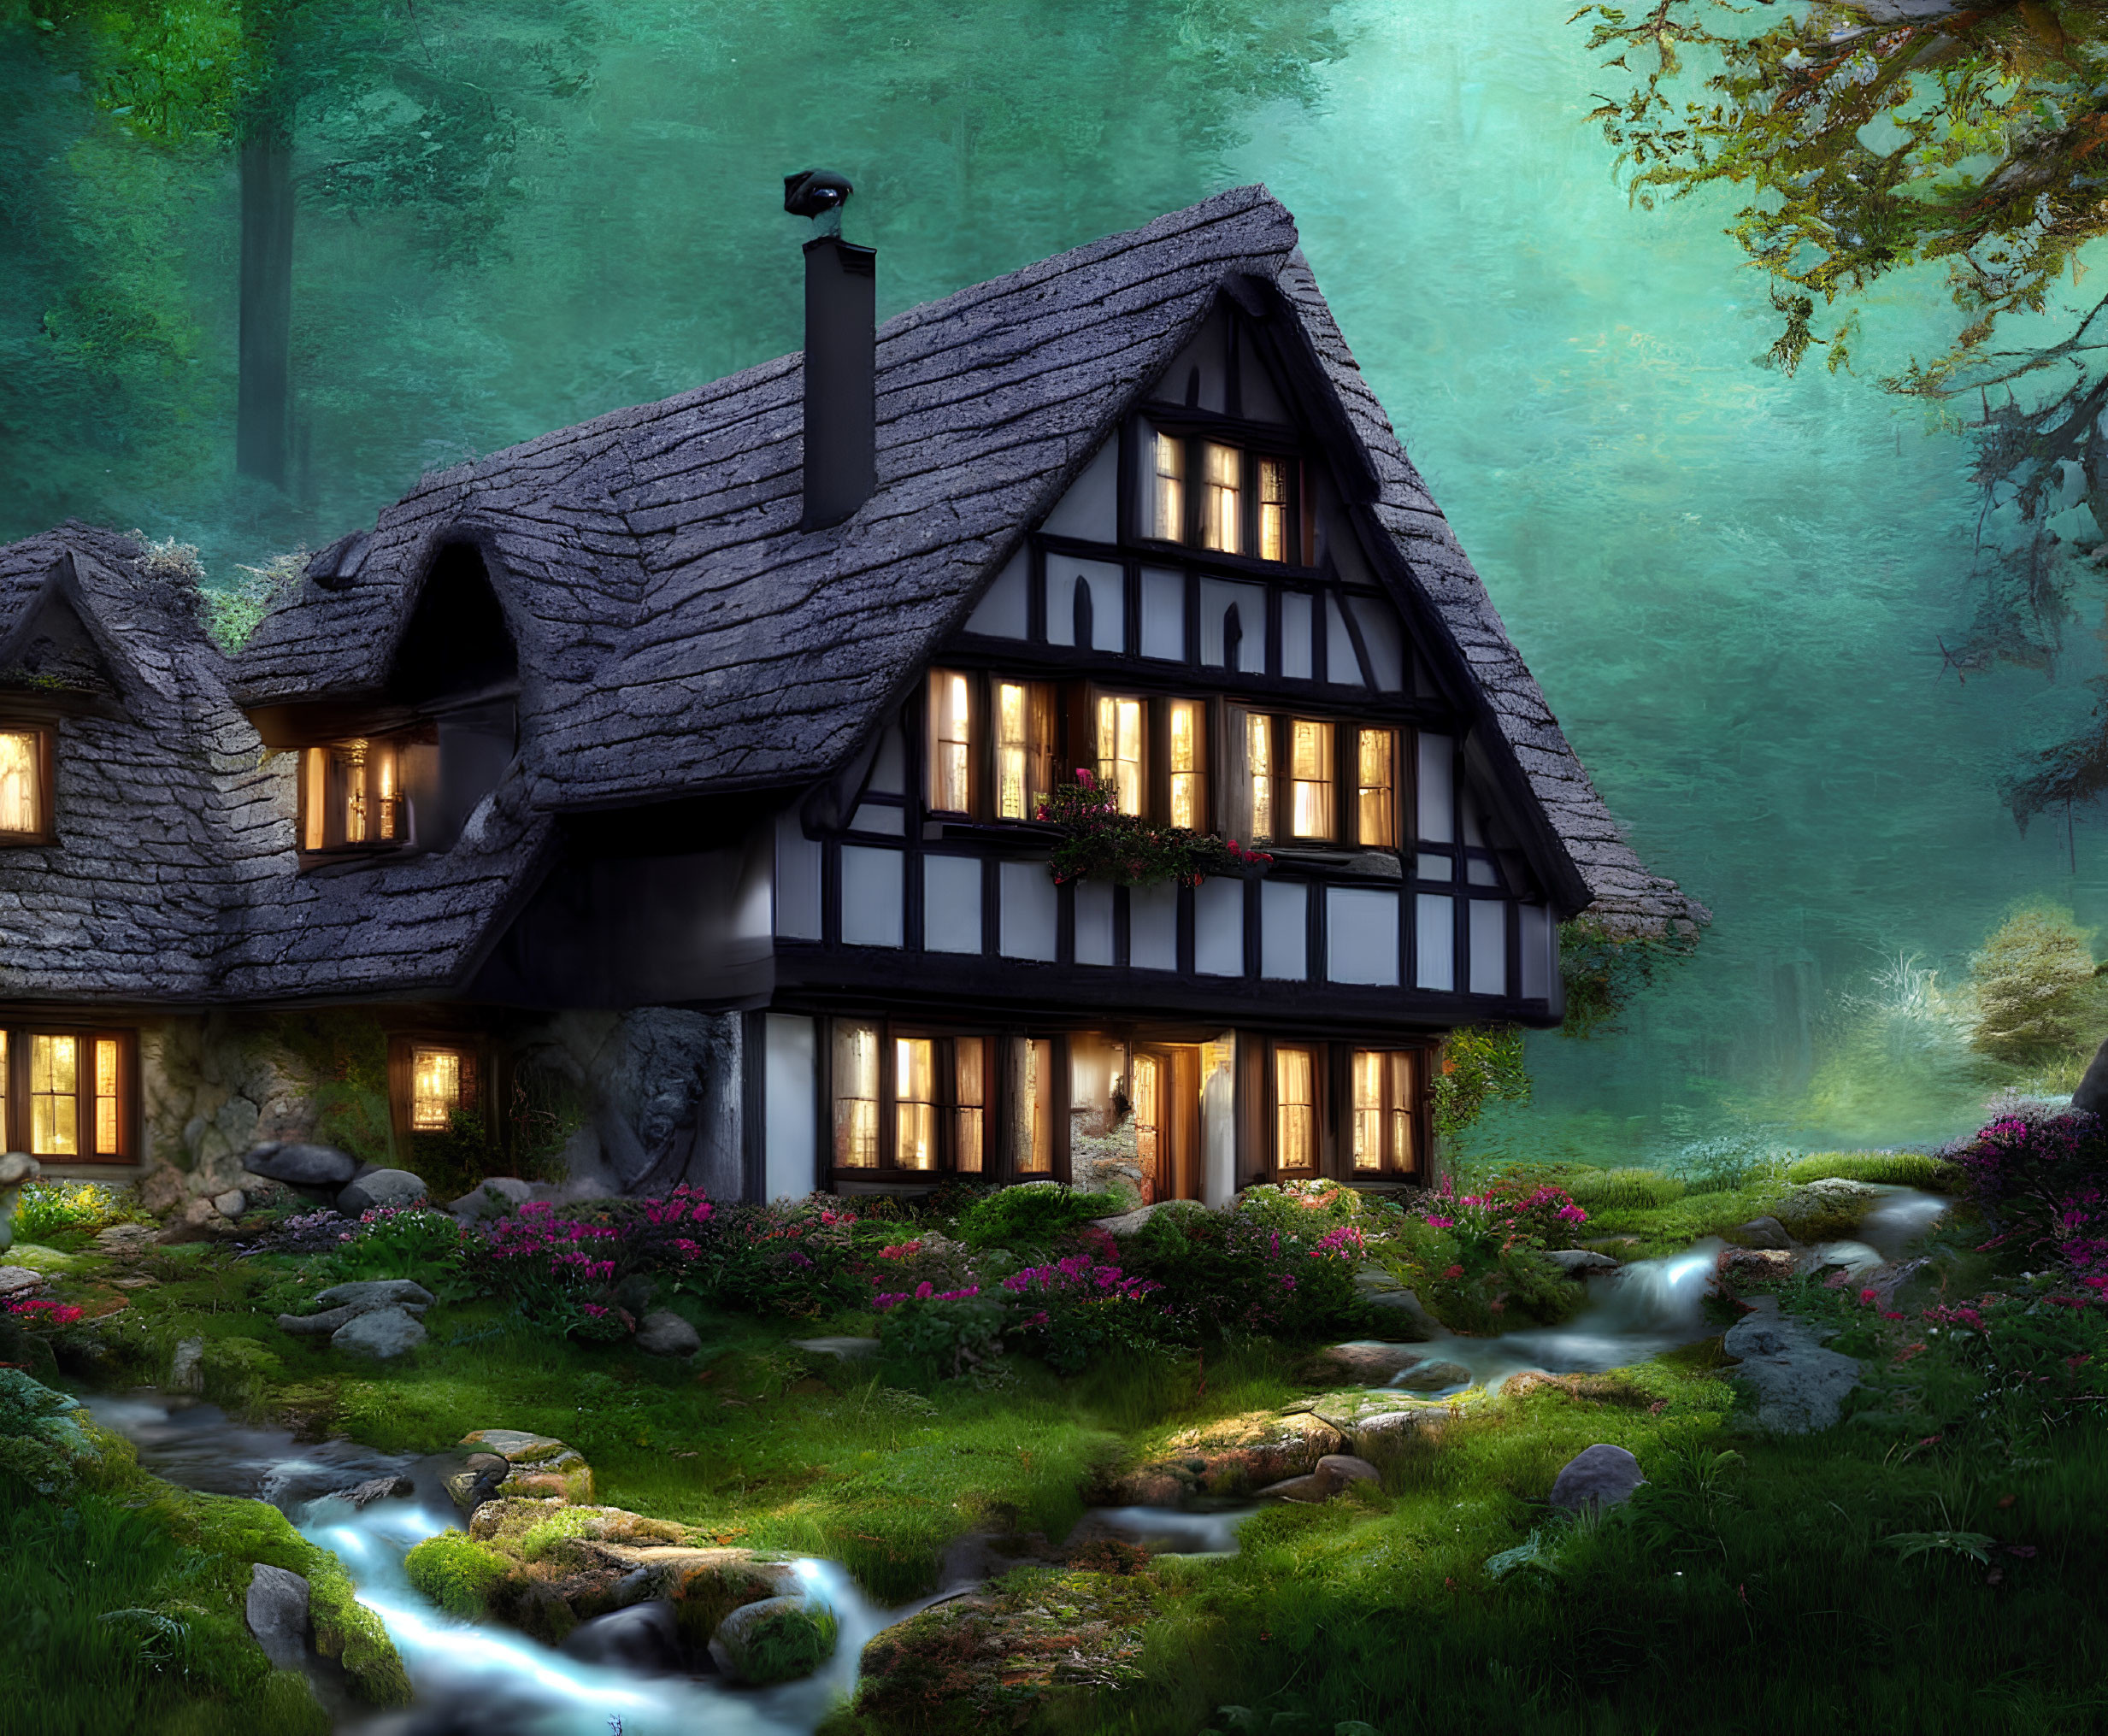 Enchanted forest cottage with babbling brook & lush greenery